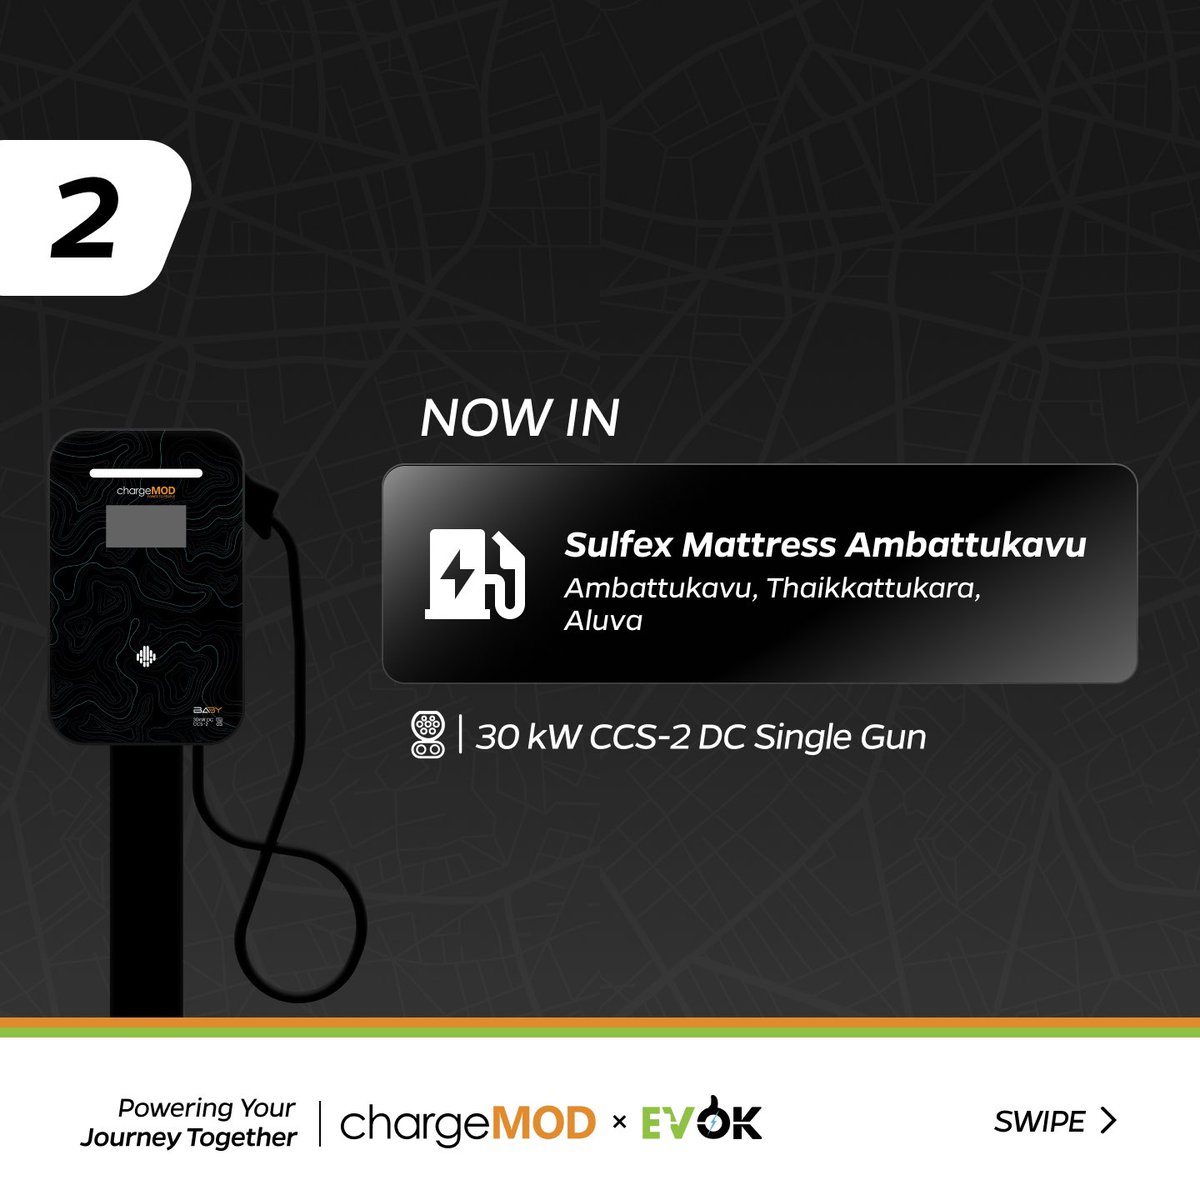 Whaattt!

We just launched 5 new EV charge points this week!

Here are the locations:

1. EQ Point EVCS, Aravanchal, Payyanur, Kannur 
2. Sulfex Mattress Ambattukavu, Aluva

(1/2)

#EVcharging #GreenFuture #ChargeMOD #chargingstations